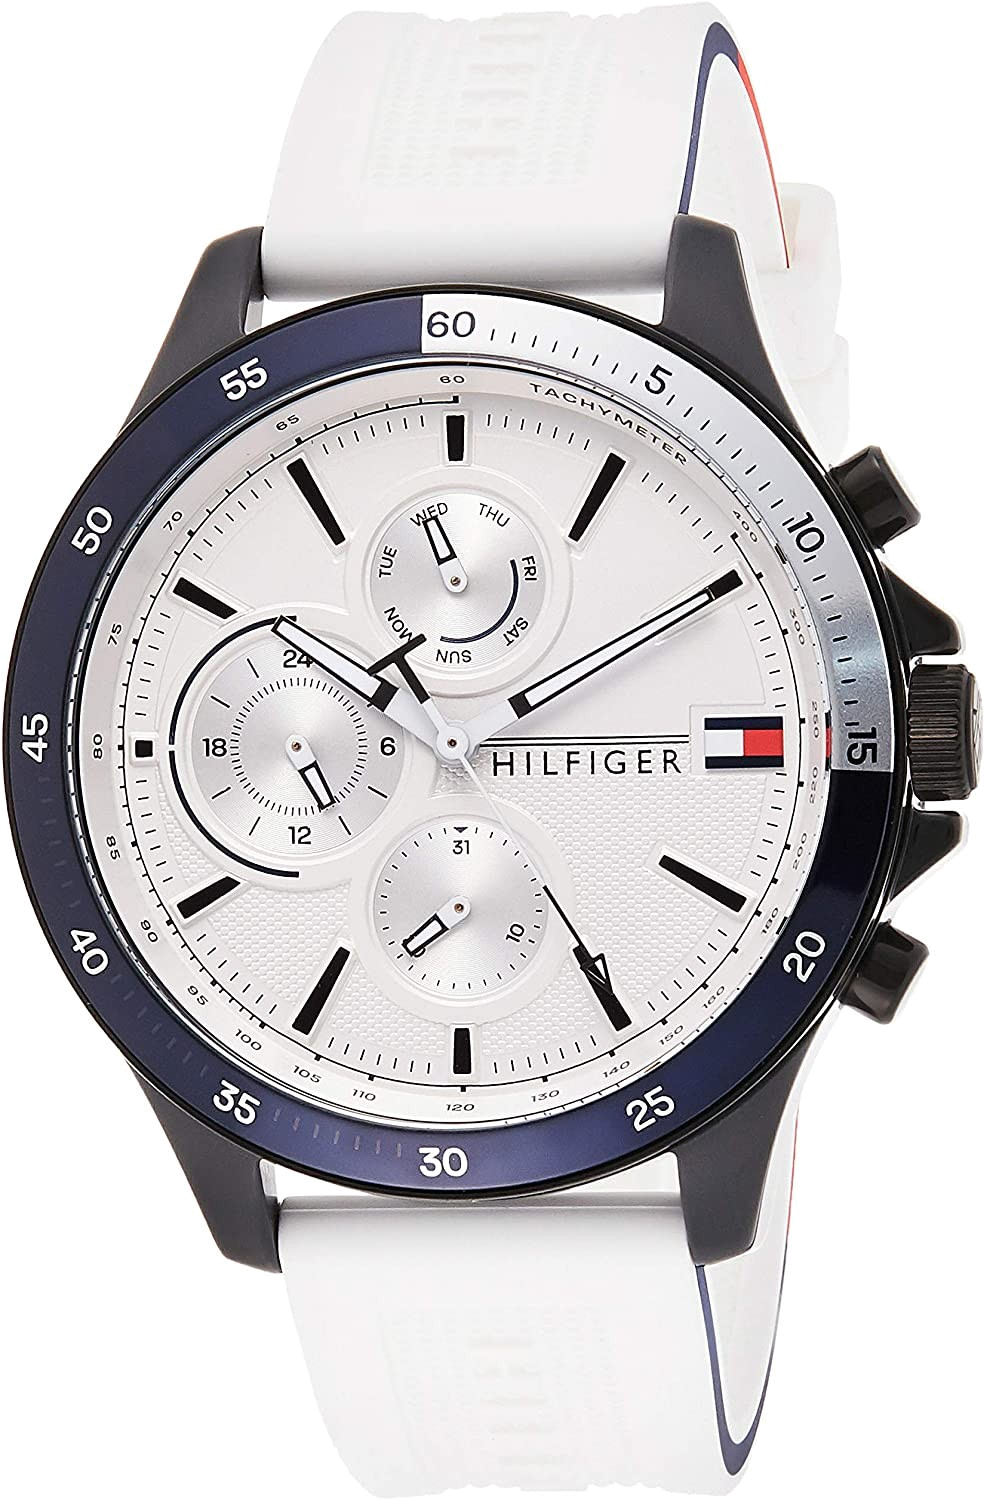 Tommy Hilfiger Watch Men - Branded Replica 1st copy watches